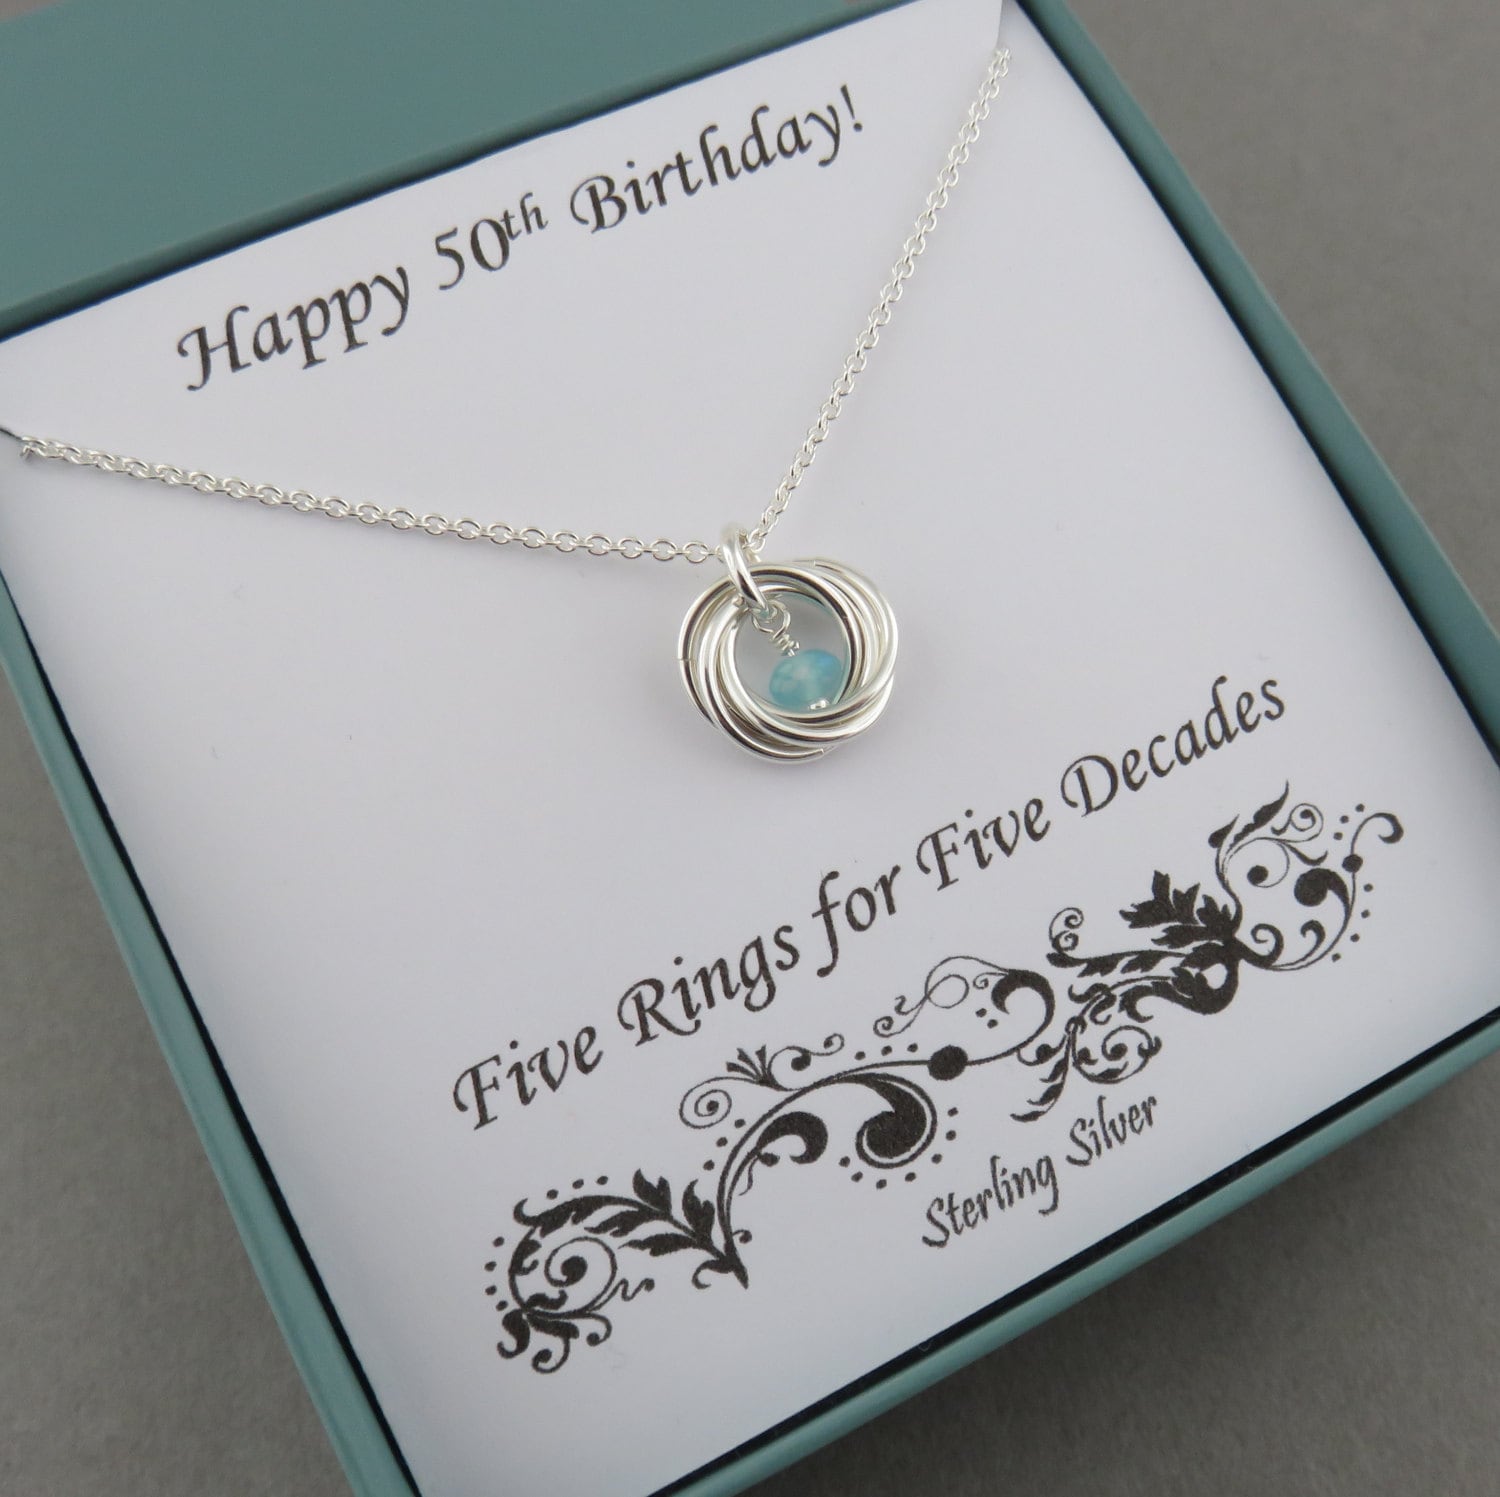 50Th Gifts For Women / 50th Birthday gift for women, 5 Rings necklace, 50th ... / From unforgettable gift experiences and personalised keepsakes to novelty gifts to make her laugh, there's plenty of 50th birthday presents for her.